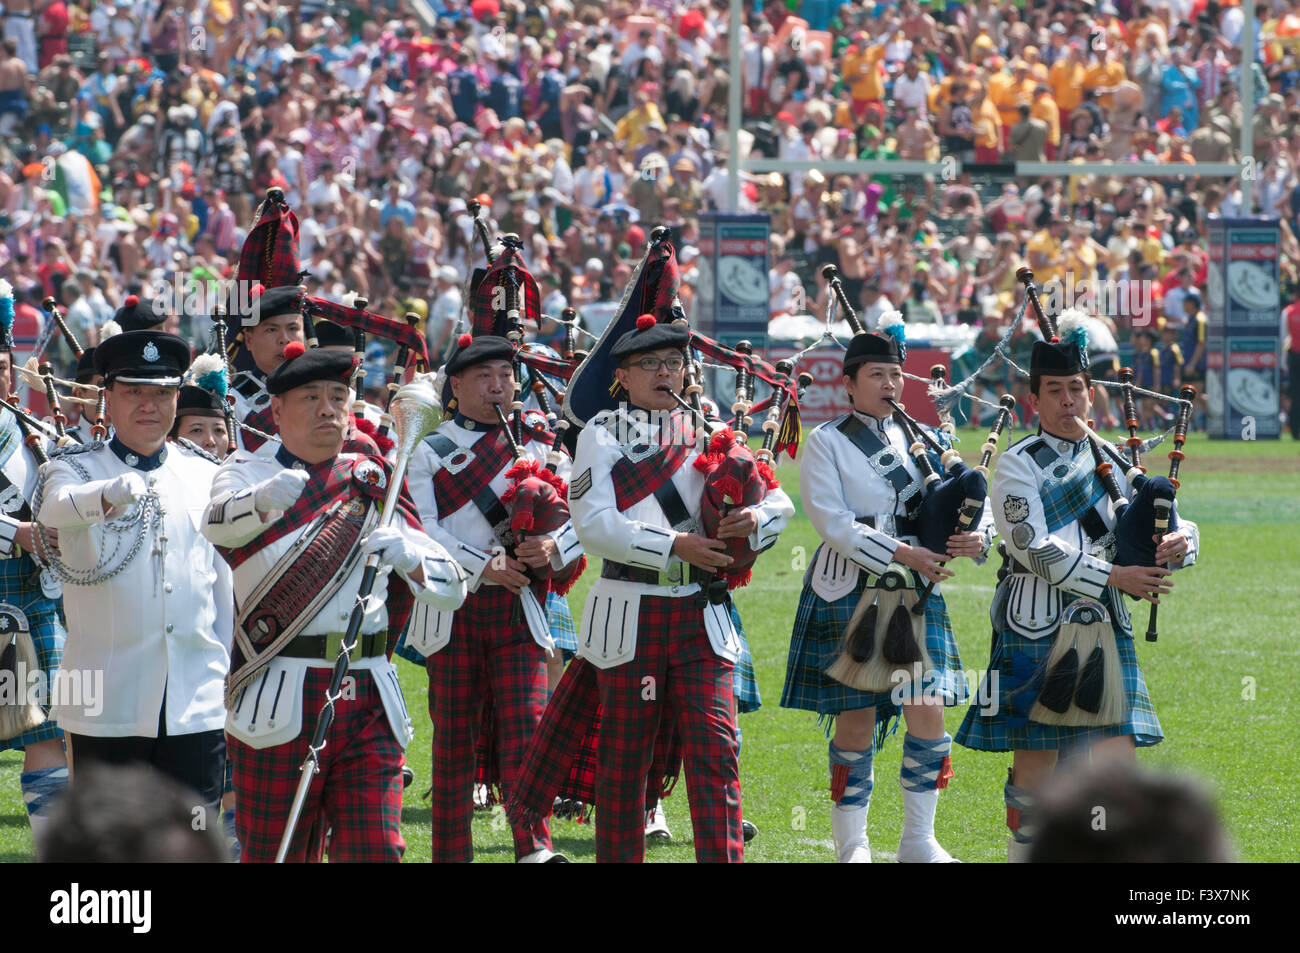 Asian Drum Major leading bagpipers in a parade after a sevens rugby match in Hong Kong Stadium, China Stock Photo